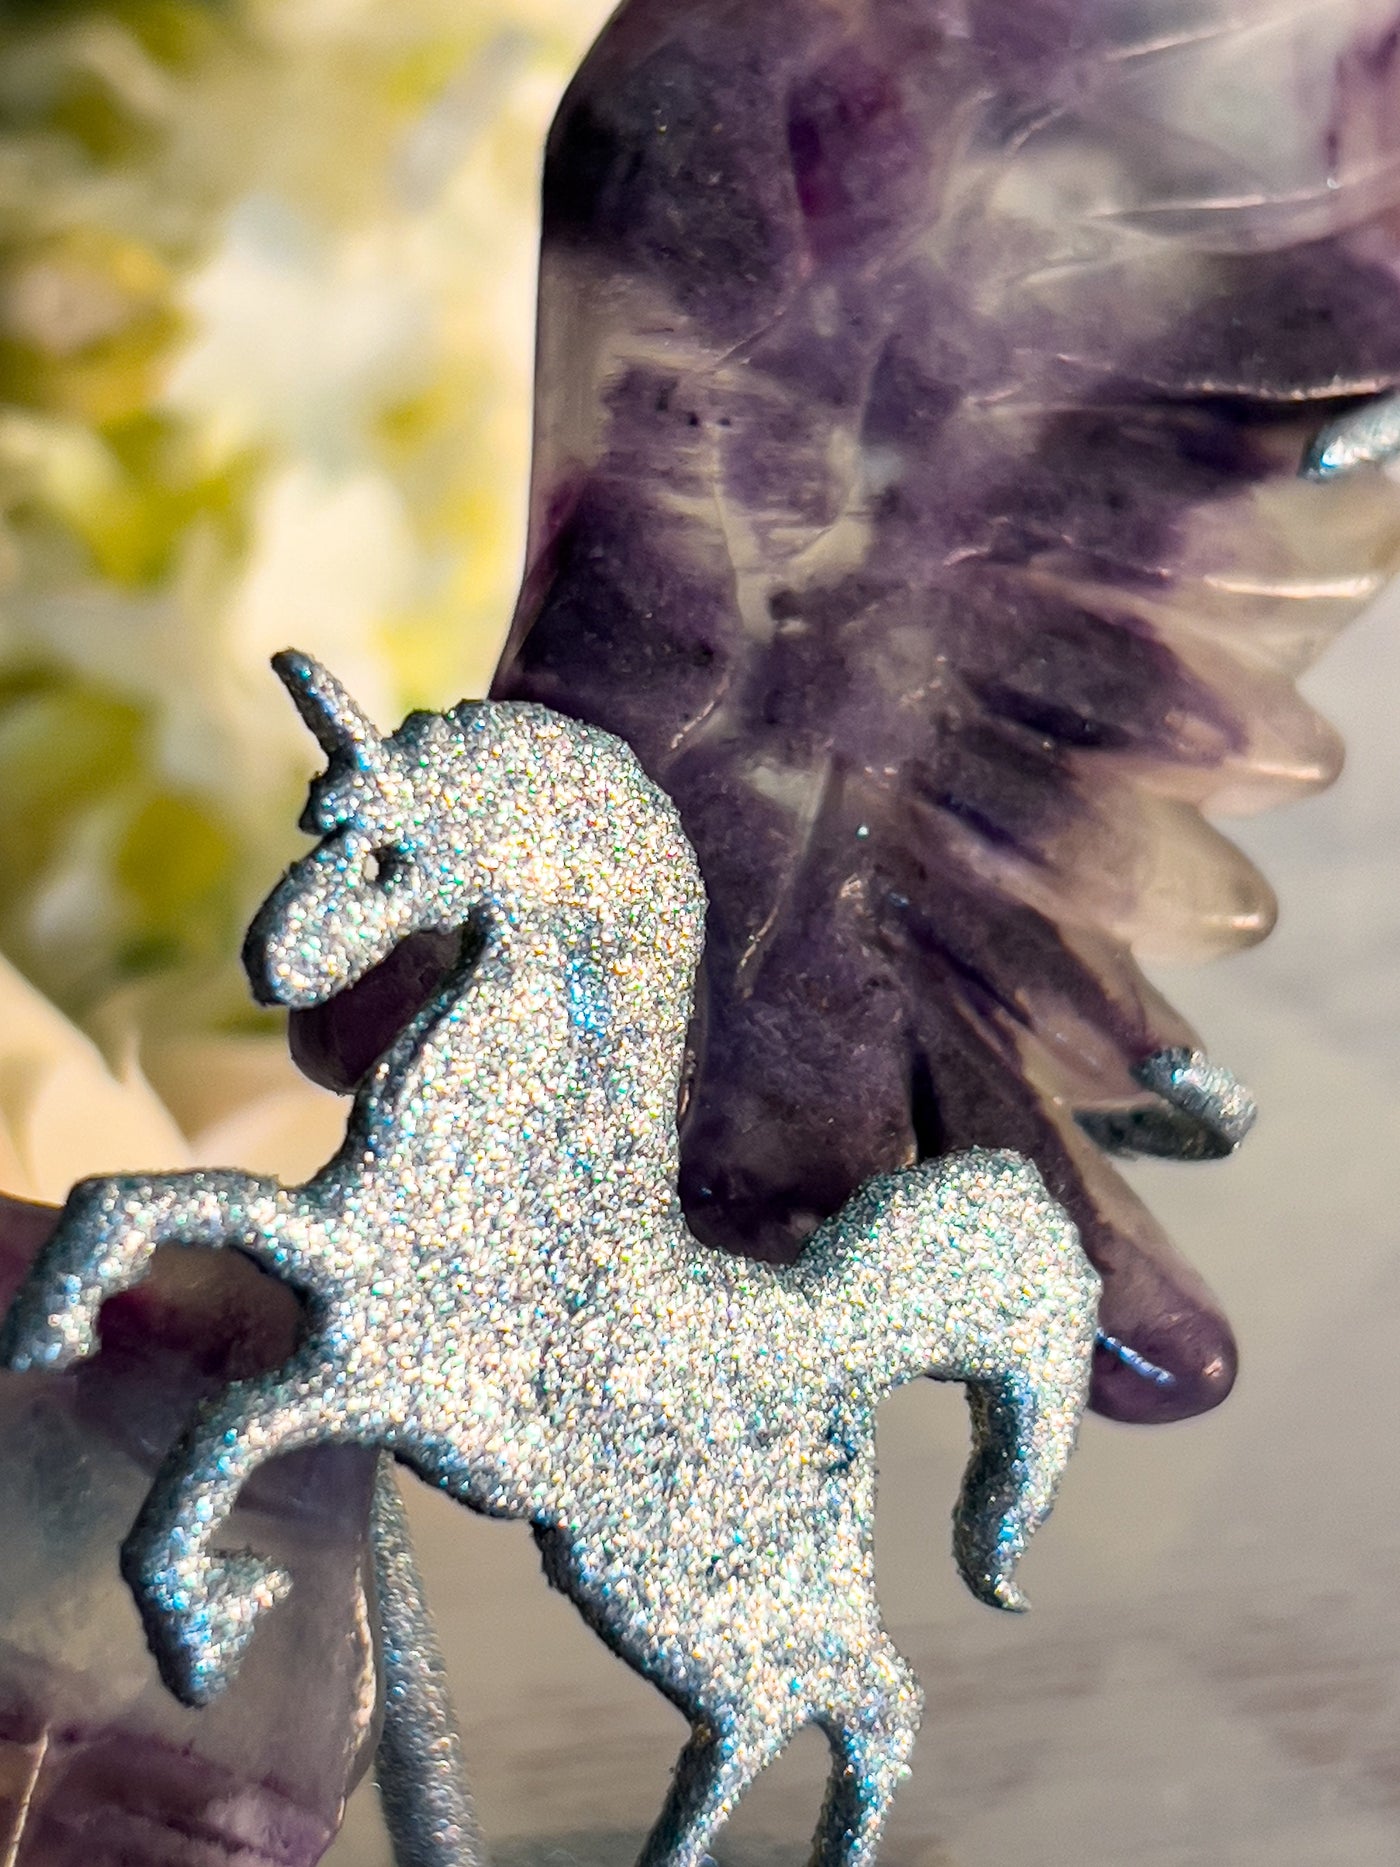 FLUORITE UNICORN WINGS ON PURPLE GLITTER STAND Revive In Style Vintage Furniture Painted Refinished Redesign Beautiful One of a Kind Artistic Antique Unique Home Decor Interior Design French Country Shabby Chic Cottage Farmhouse Grandmillenial Coastal Chalk Paint Metallic Glam Eclectic Quality Dovetailed Rustic Furniture Painter Pinterest Bedroom Living Room Entryway Kitchen Home Trends House Styles Decorating ideas